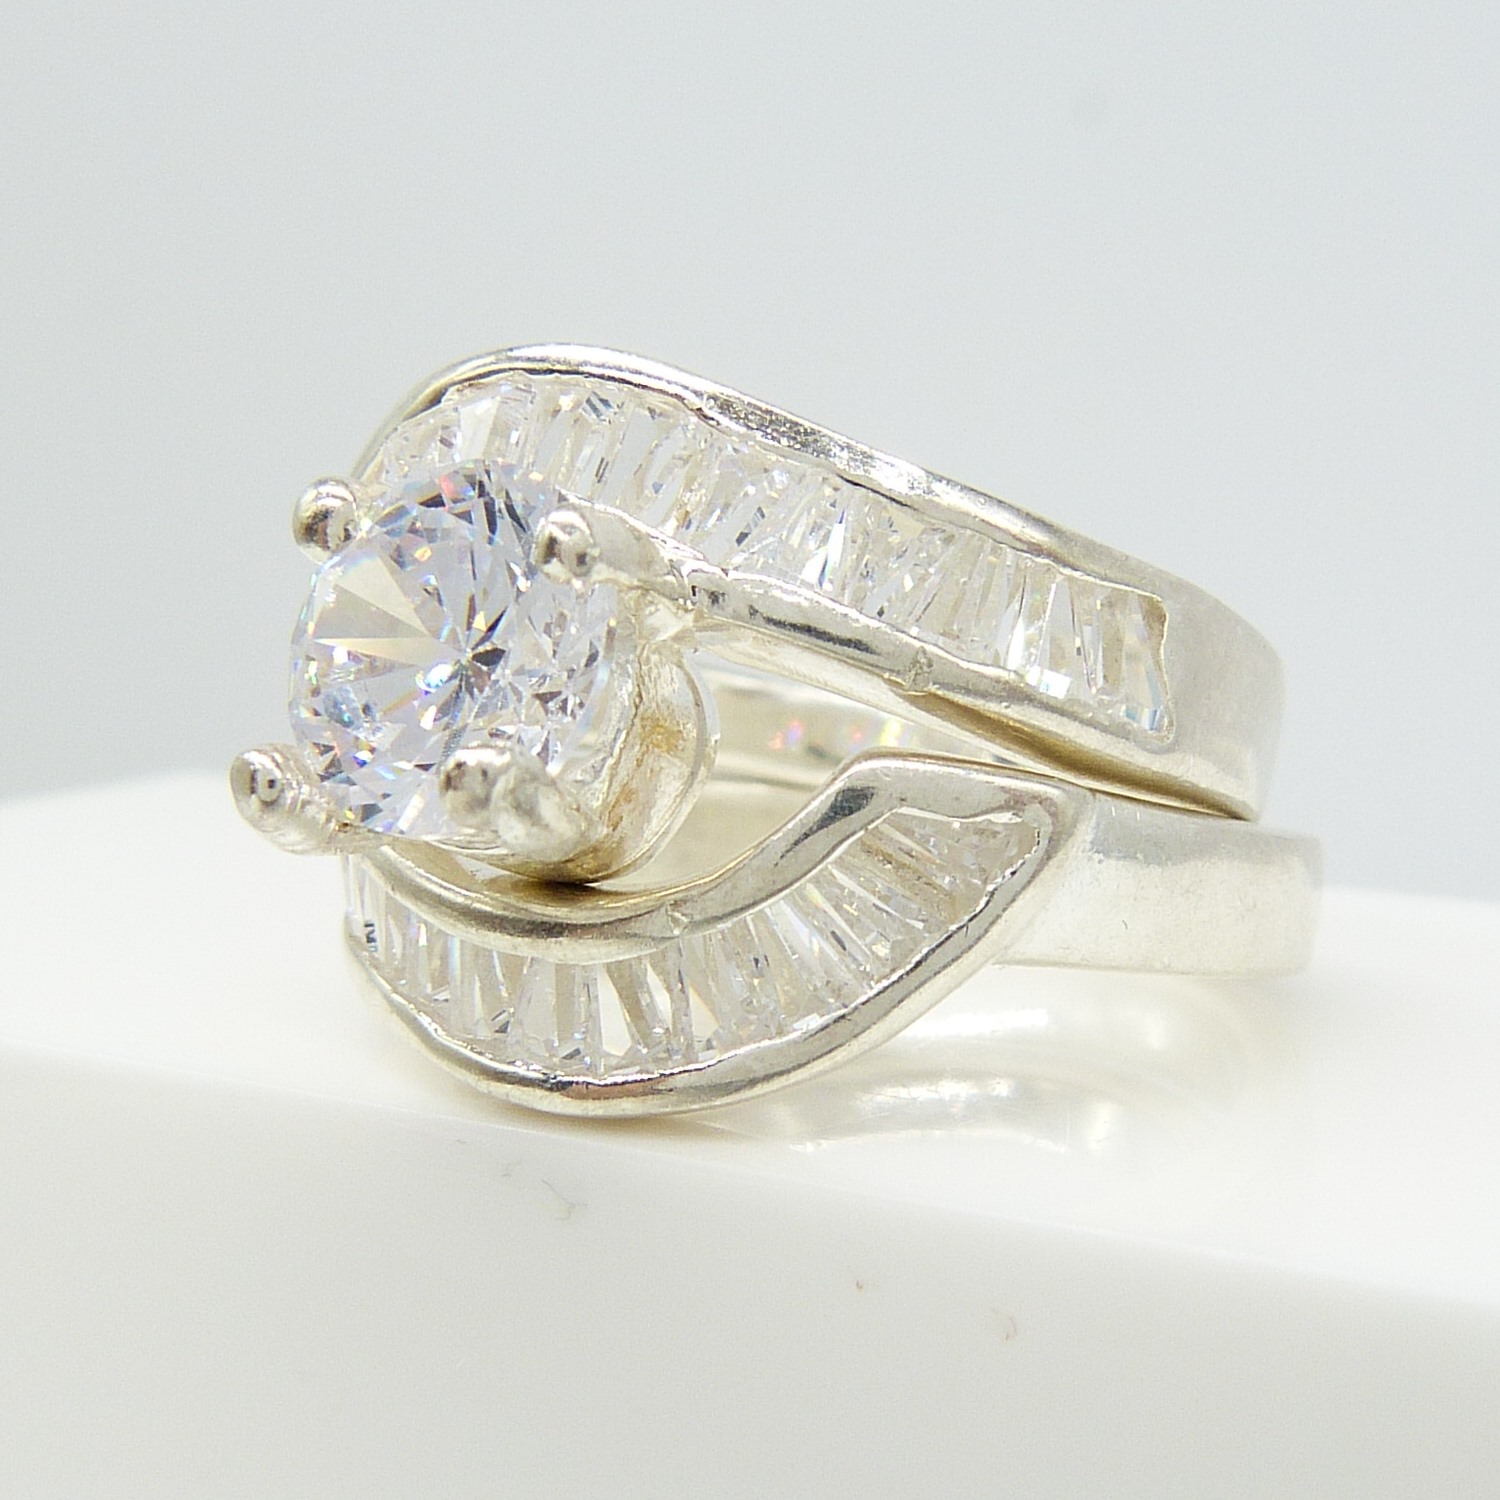 Two part cubic zirconia-set silver wave-style dress ring - Image 4 of 7